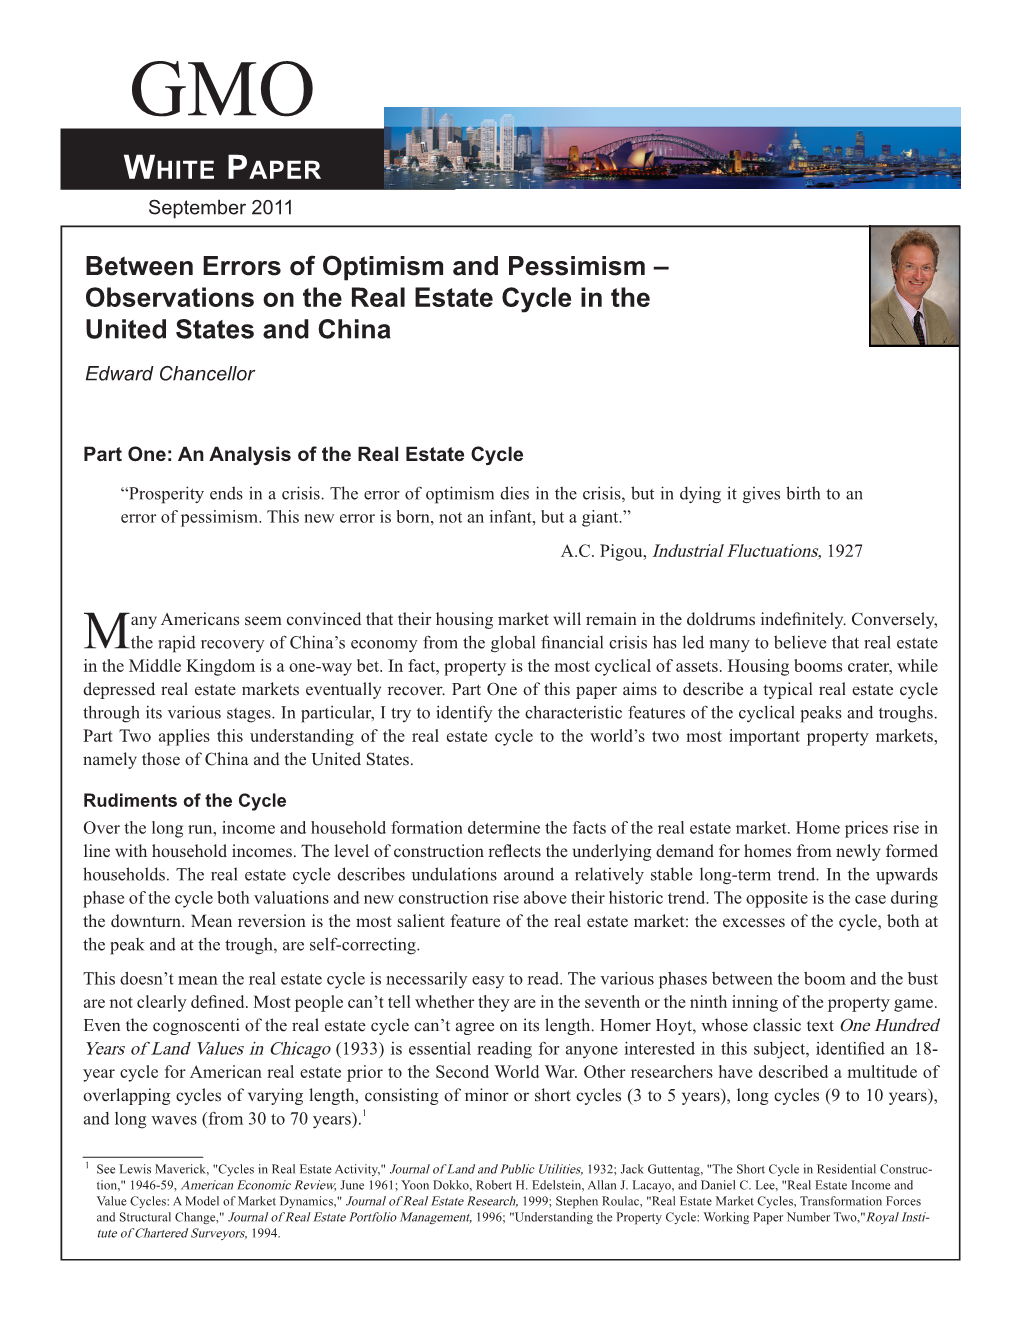 Between Errors of Optimism and Pessimism – Observations on the Real Estate Cycle in the United States and China Edward Chancellor